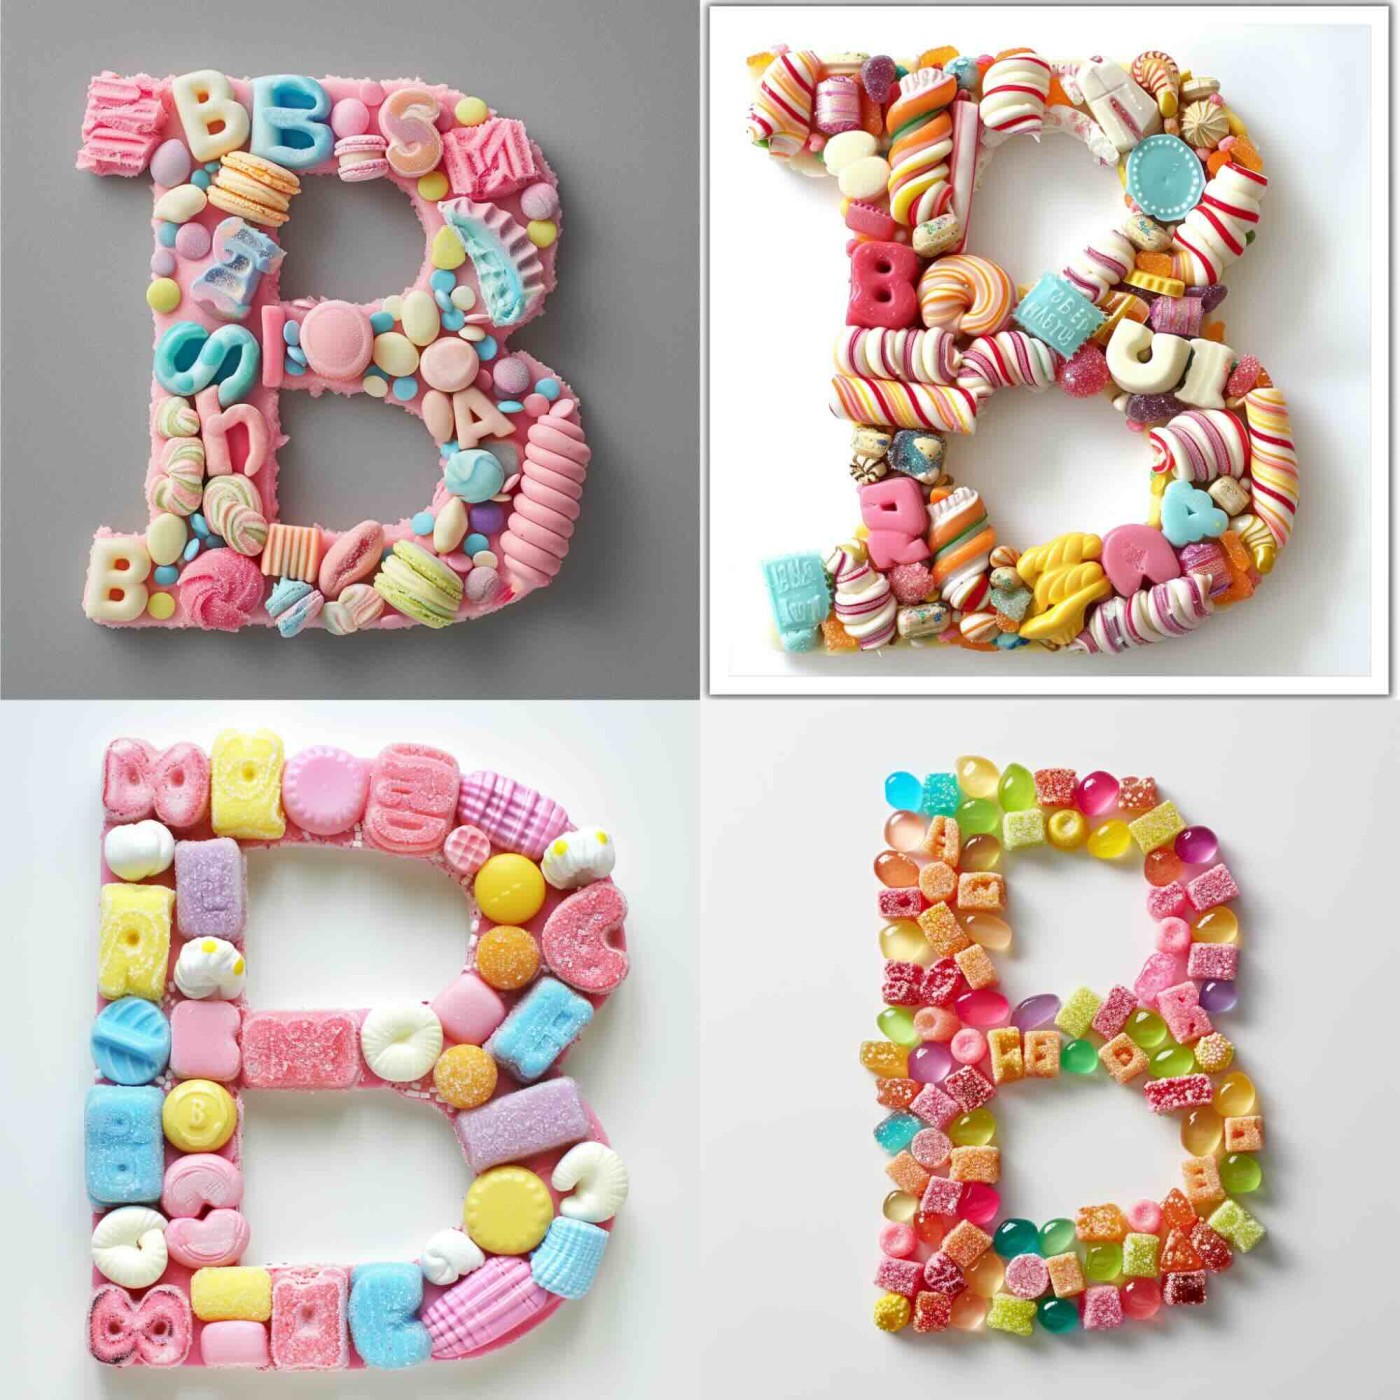 The letter 'B' made of candy